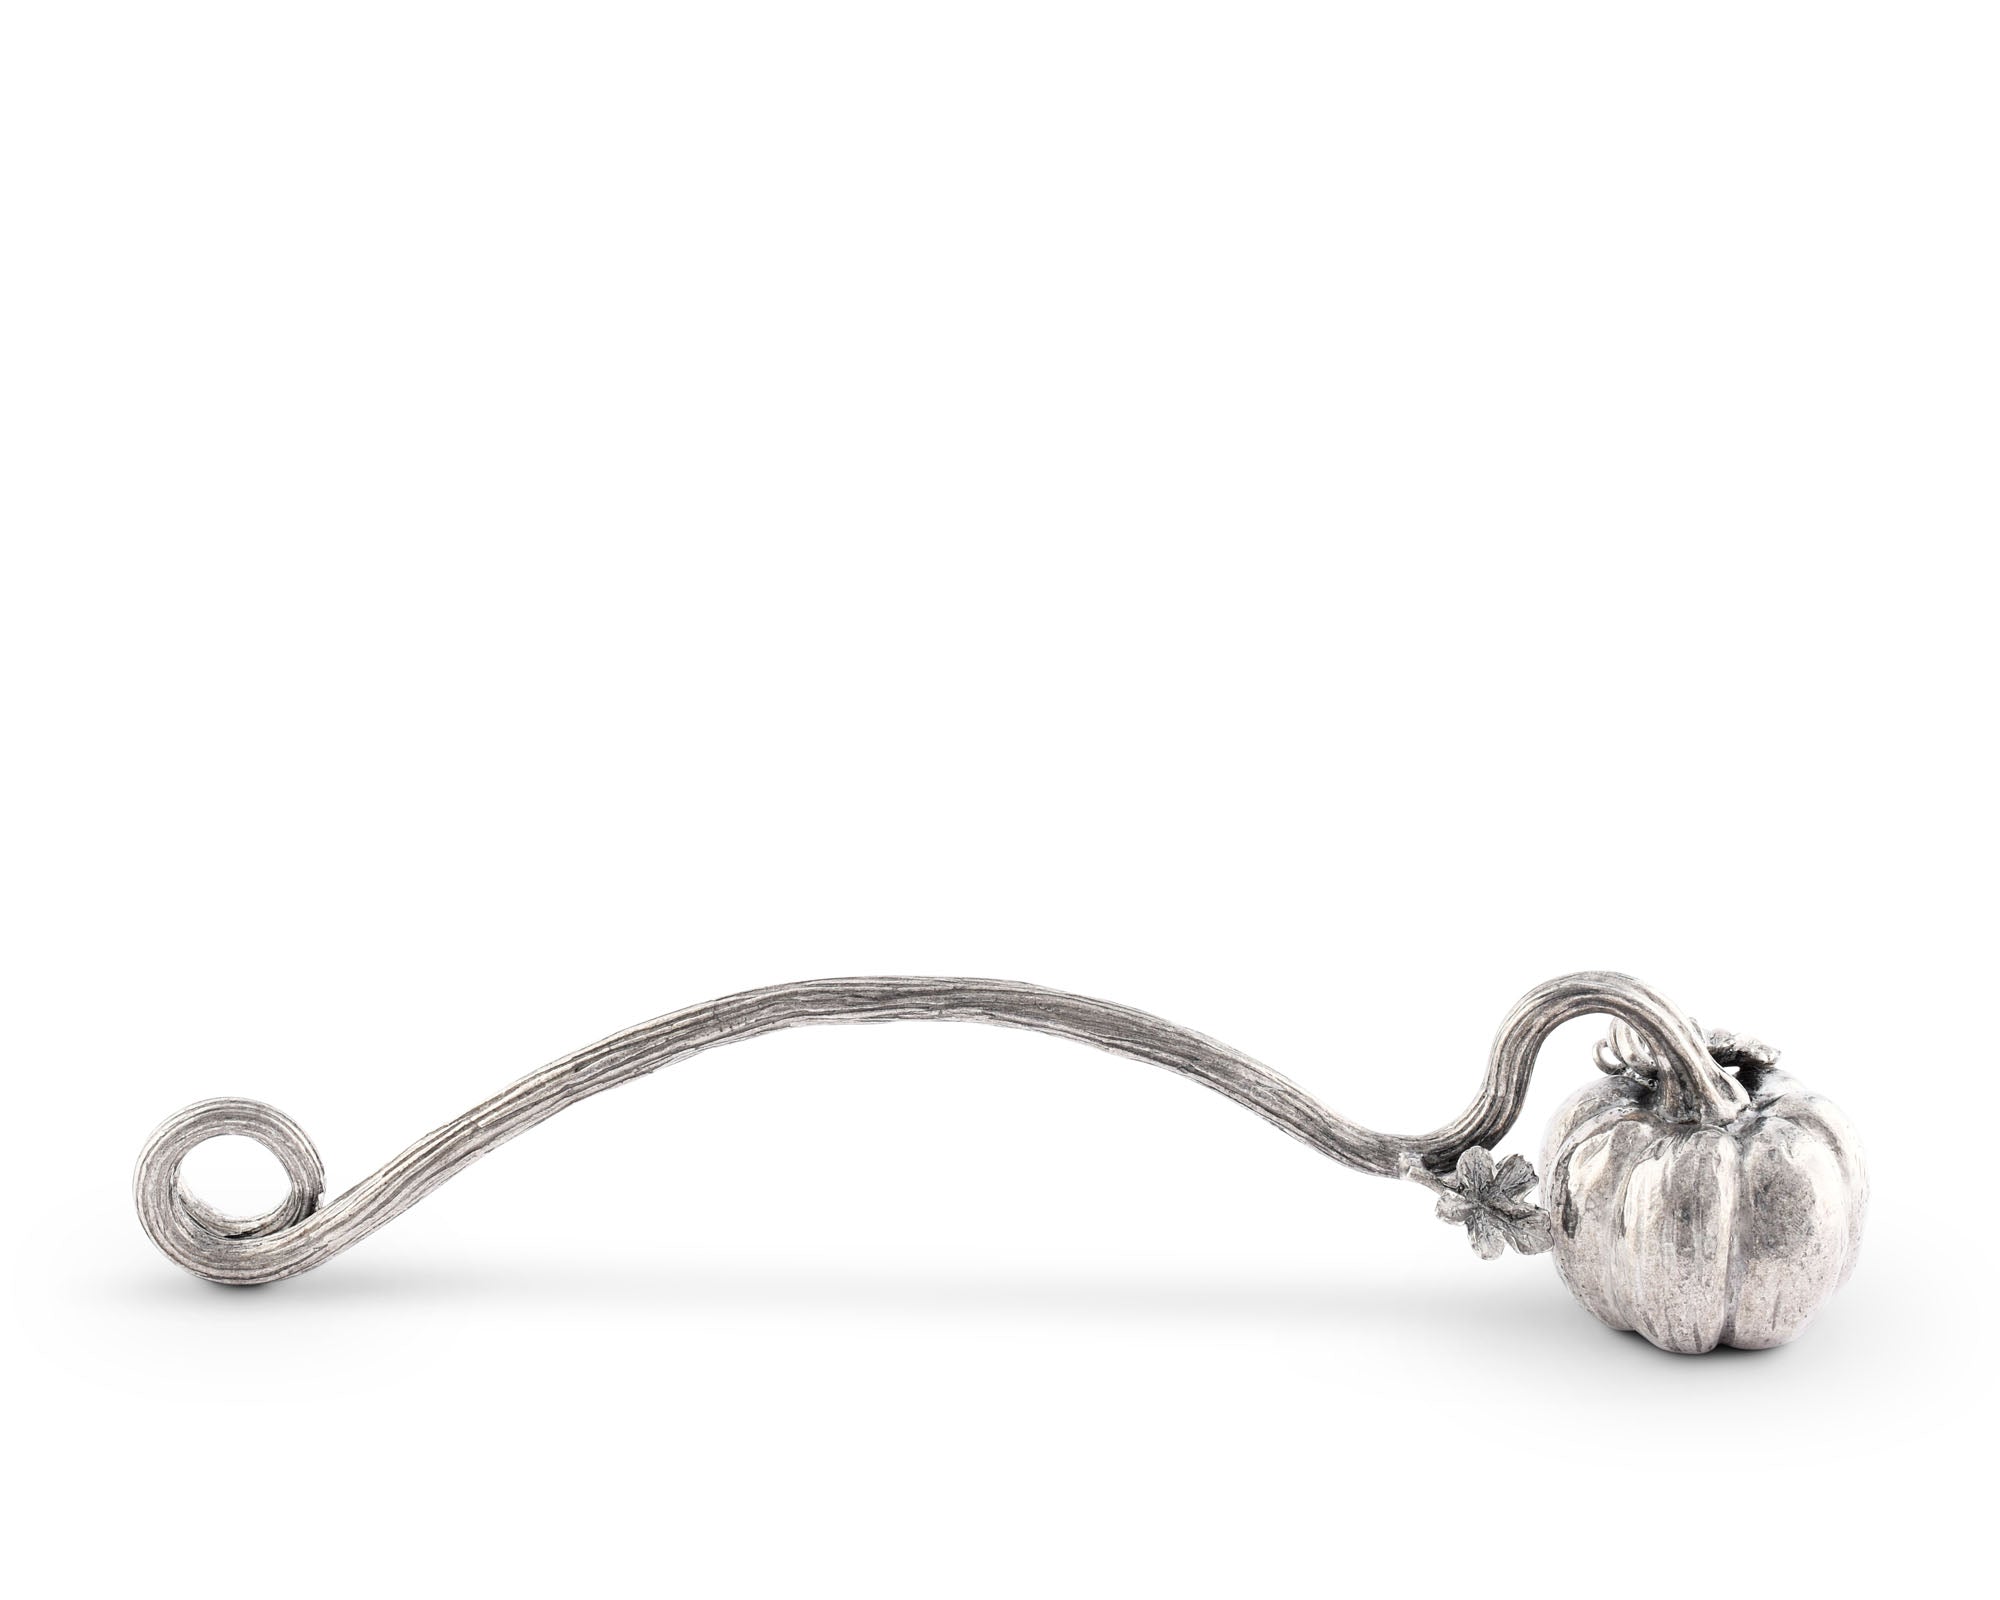 Vagabond House Pewter Pumpkin Candle Snuffer Product Image